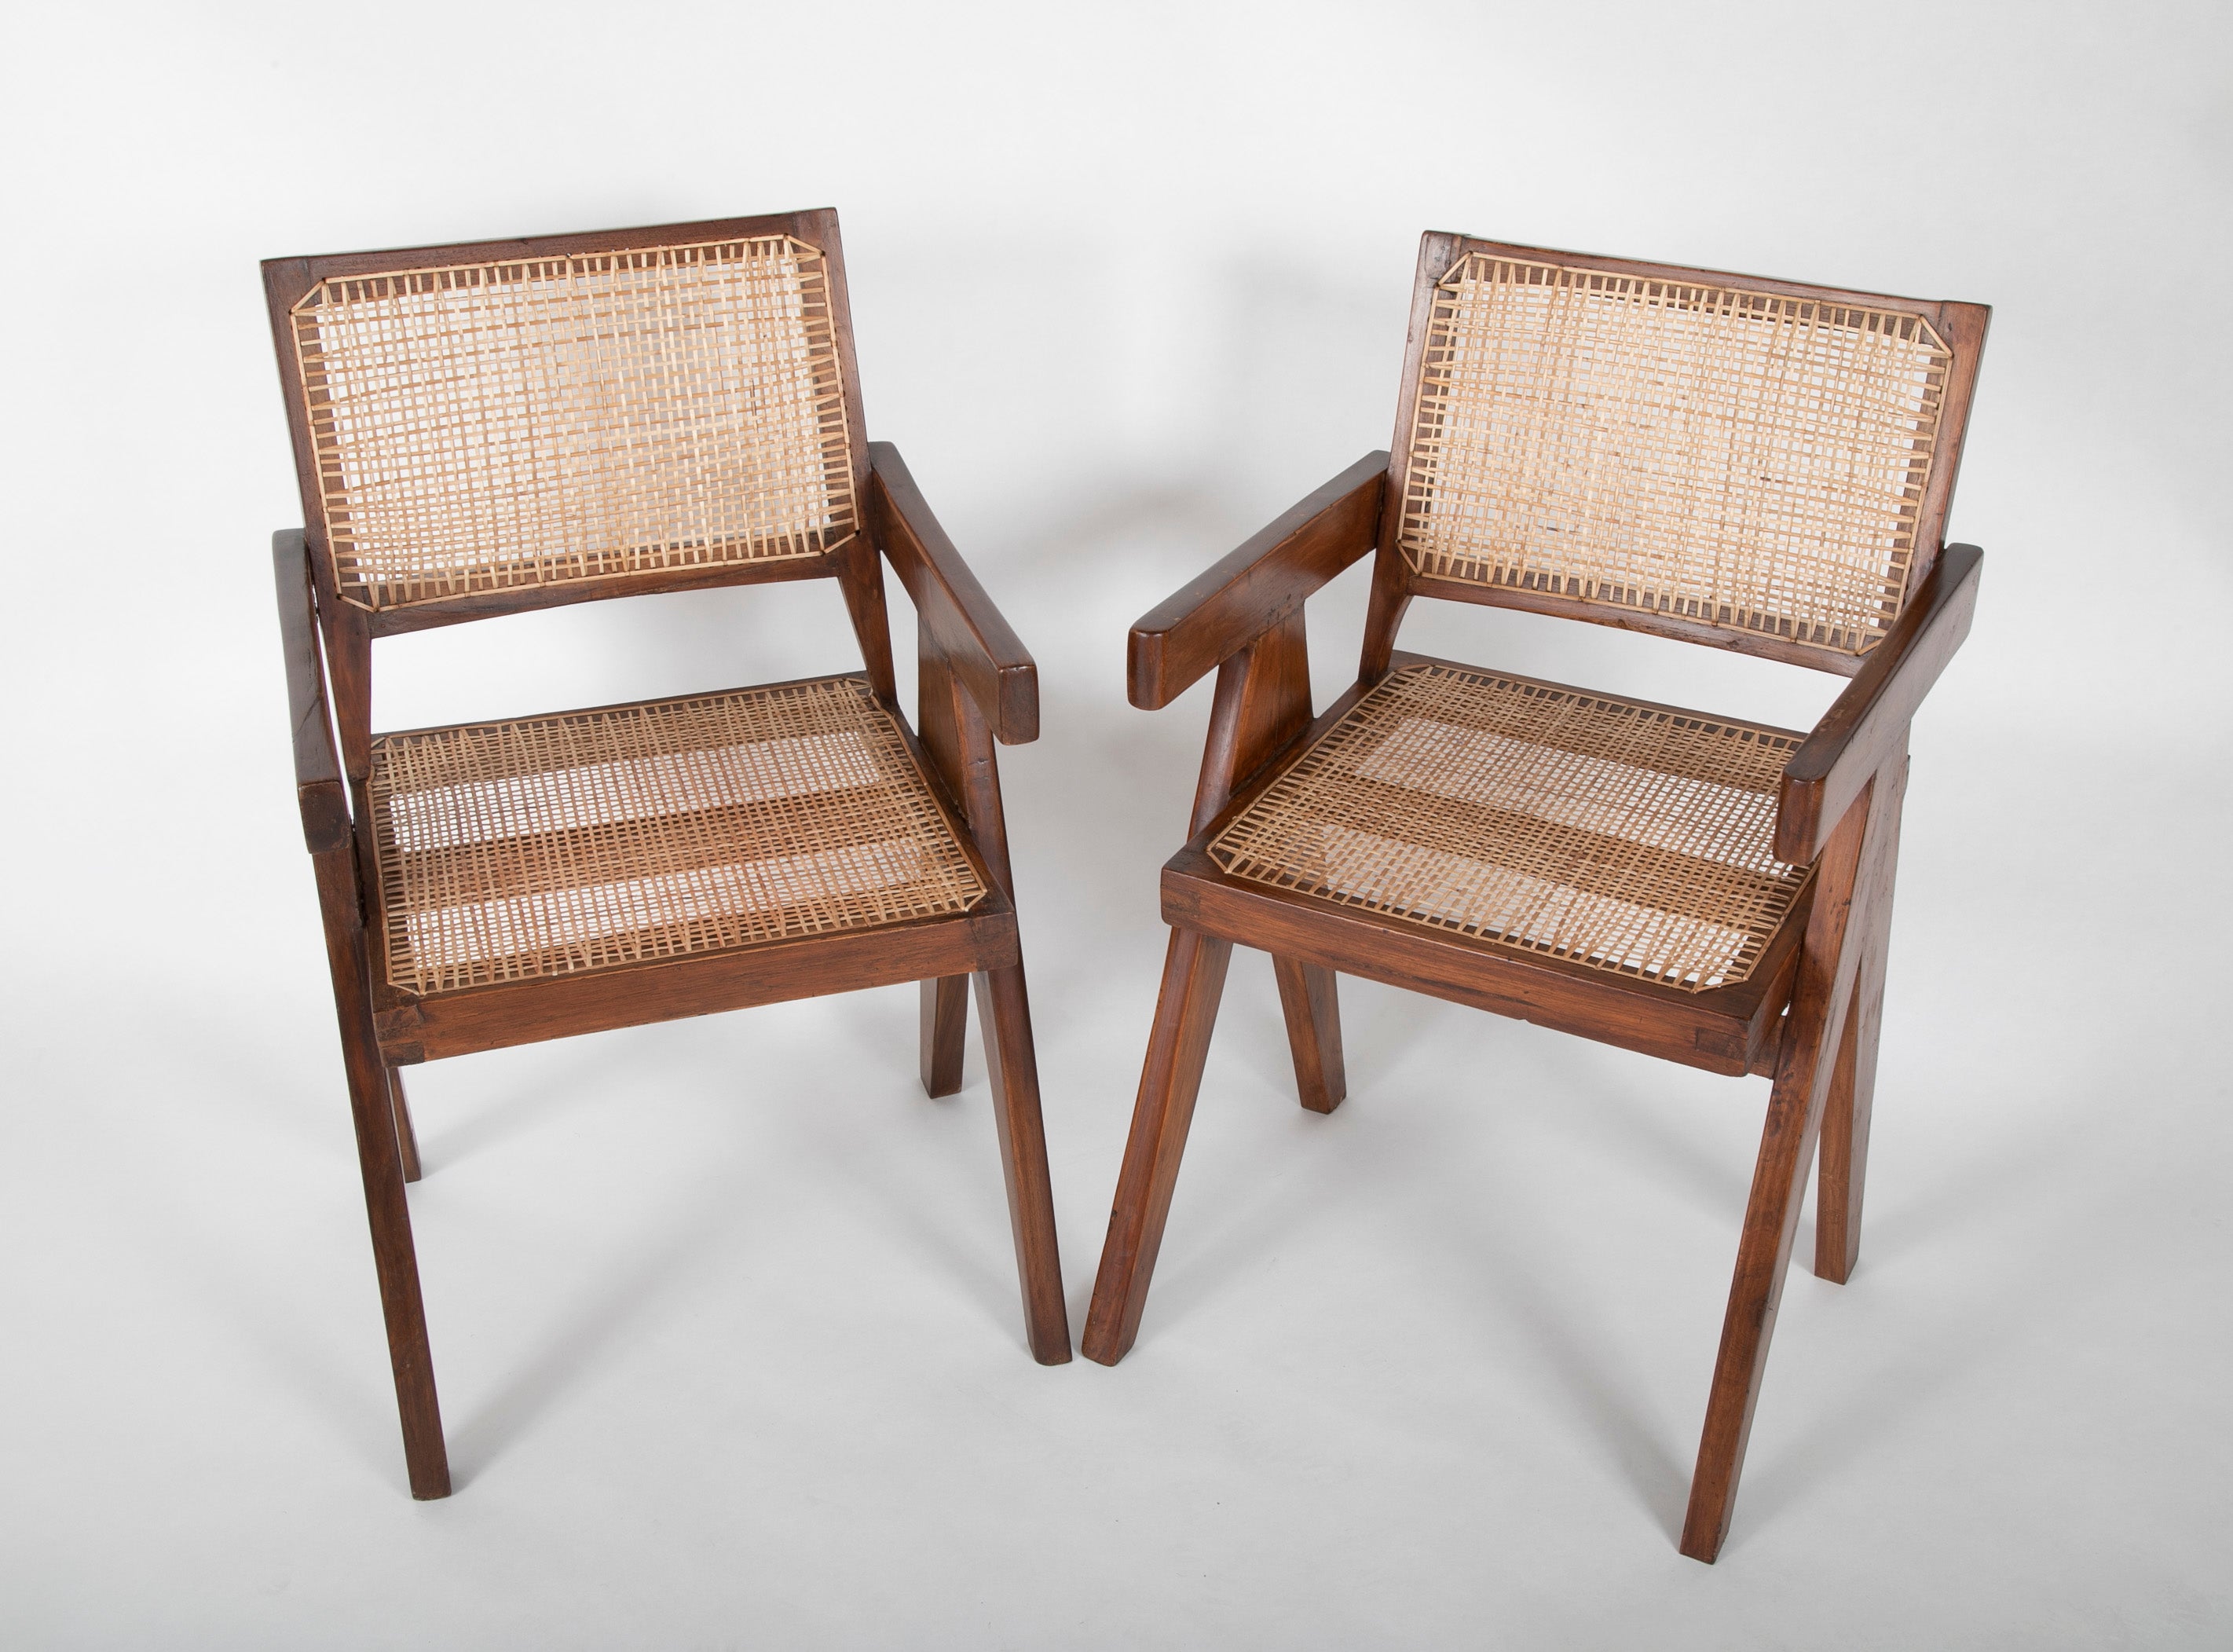 Pair of Original Pierre Jeanneret Office Chairs with 'X' Leg